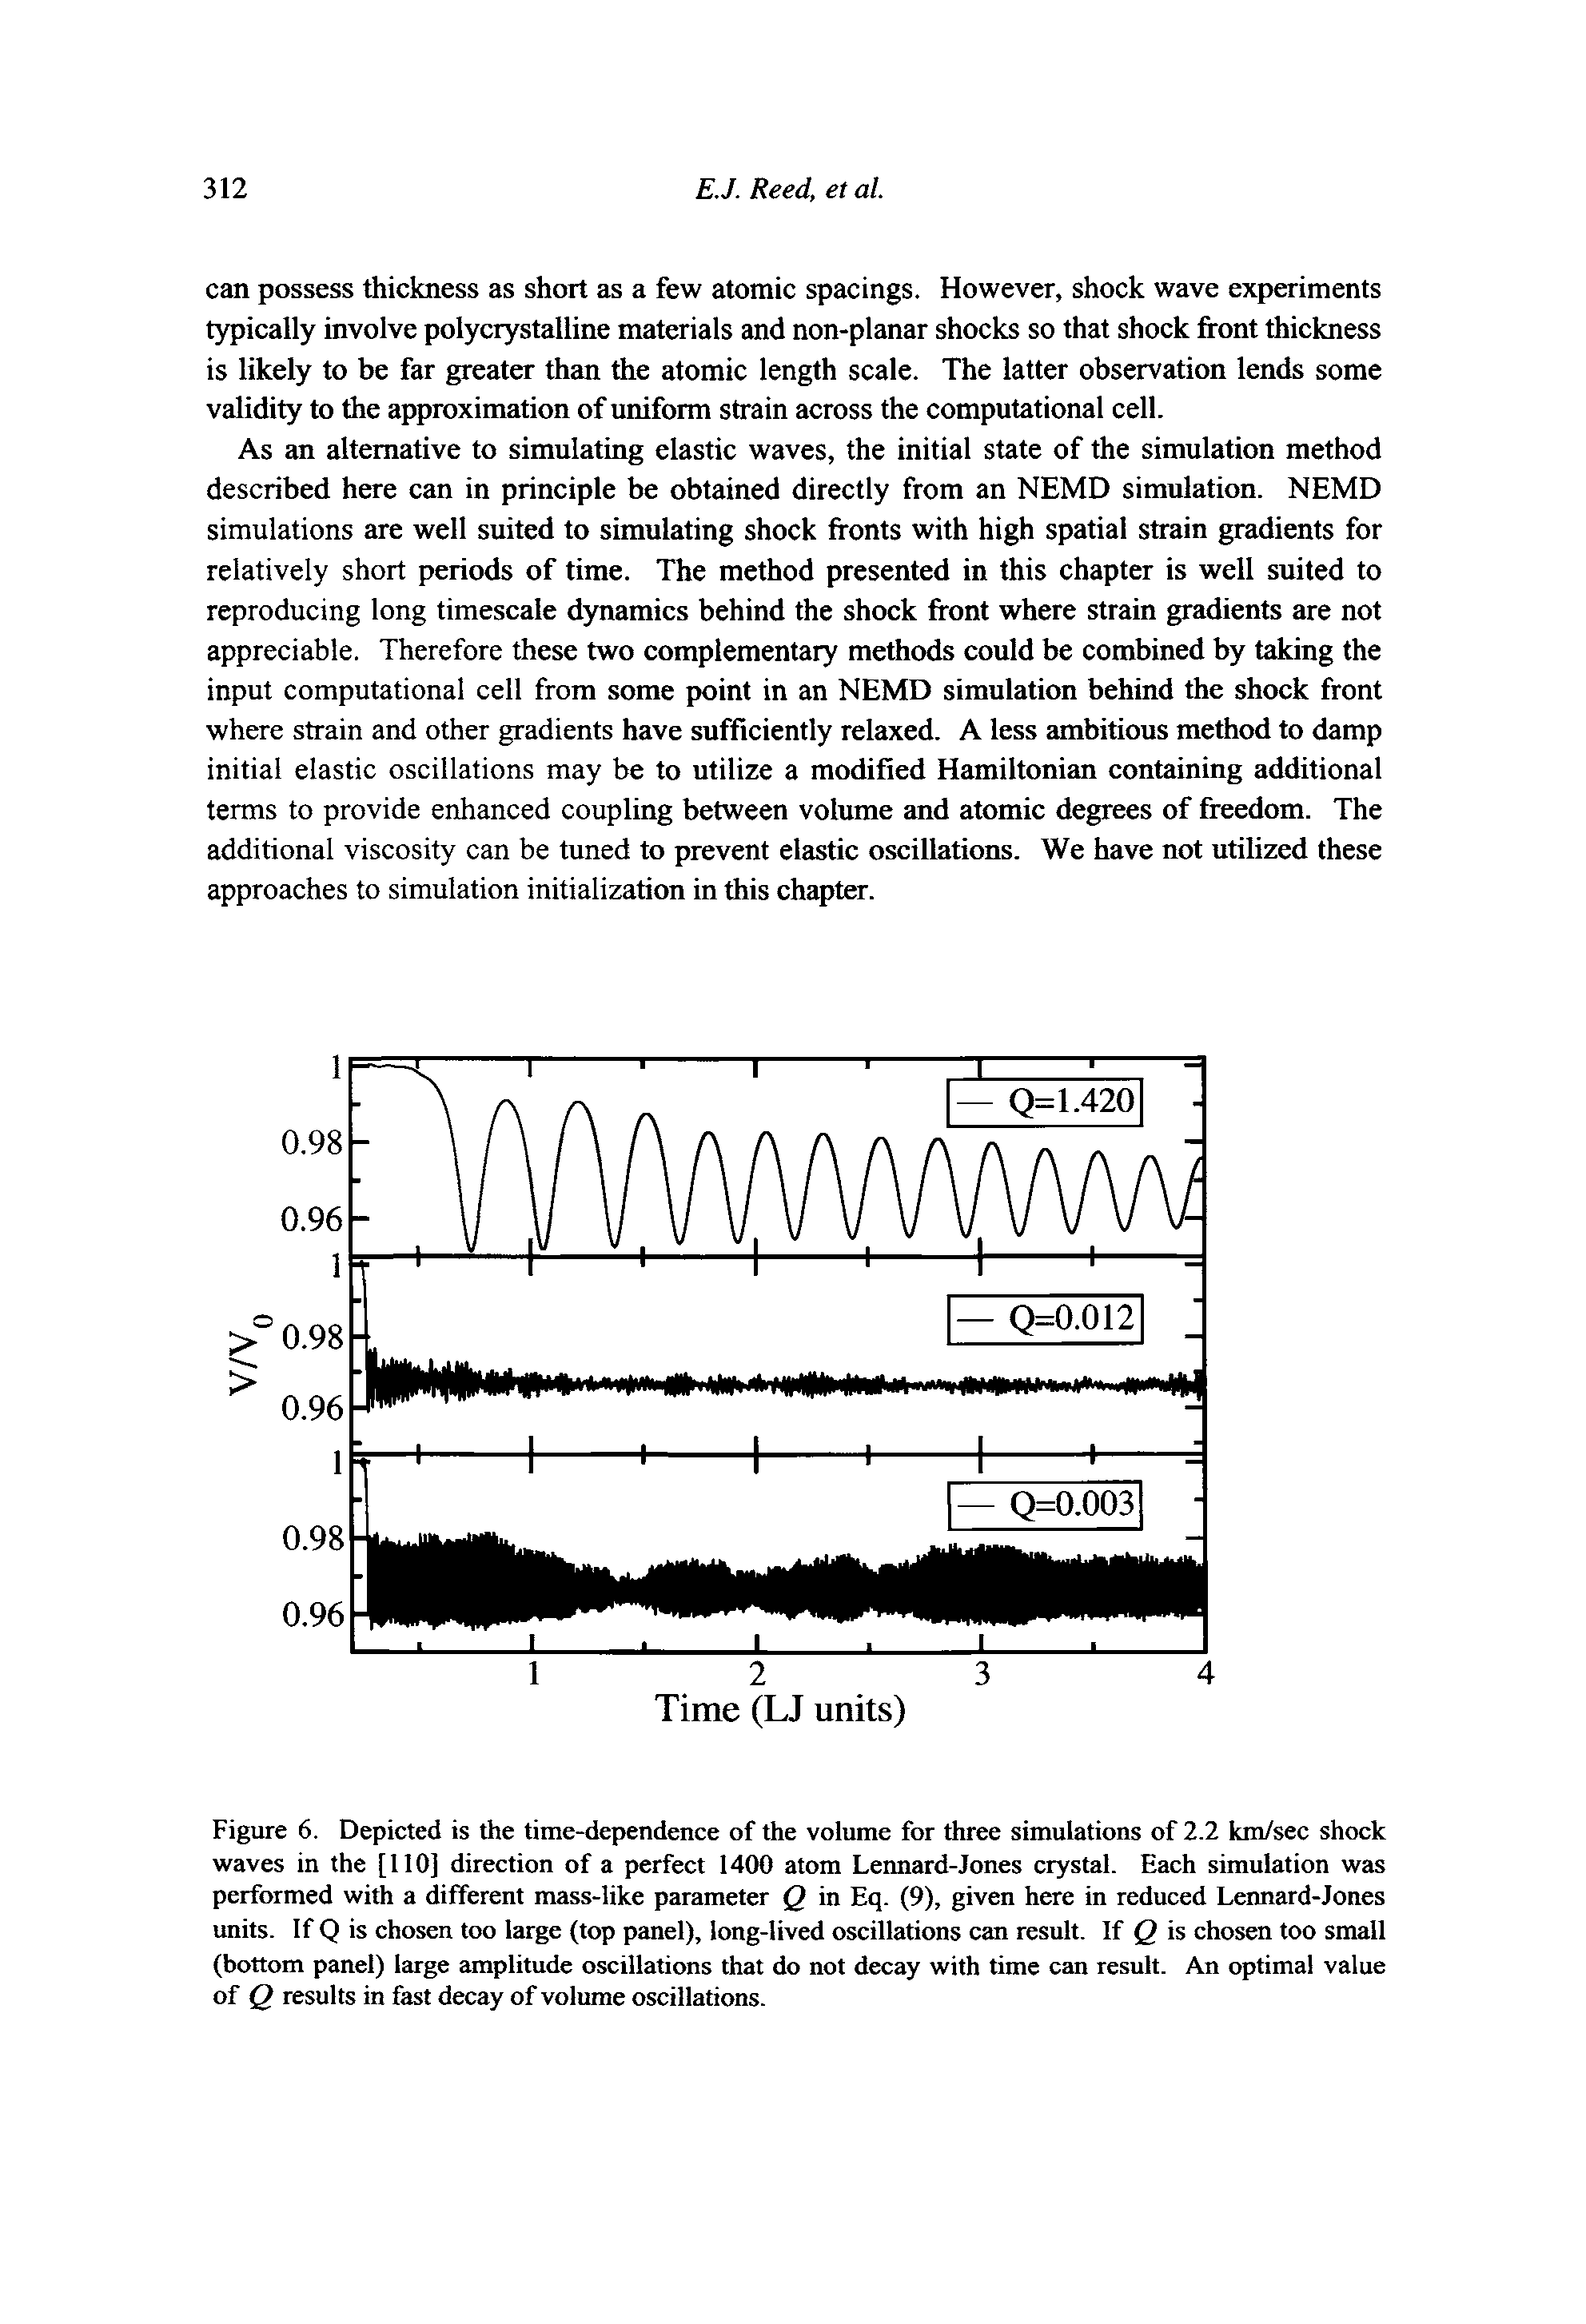 Figure 6. Depicted is the time-dependence of the volume for three simulations of 2.2 km/sec shock waves in the [110] direction of a perfect 1400 atom Lennard-Jones crystal. Each simulation was performed with a different mass-like parameter Q in Eq. (9), given here in reduced Leimard-Jones units. If Q is chosen too large (top panel), long-lived oscillations can result. If Q is chosen too small (bottom panel) large amplitude oscillations that do not decay with time can result. An optimal value of Q results in fast decay of volume oscillations.